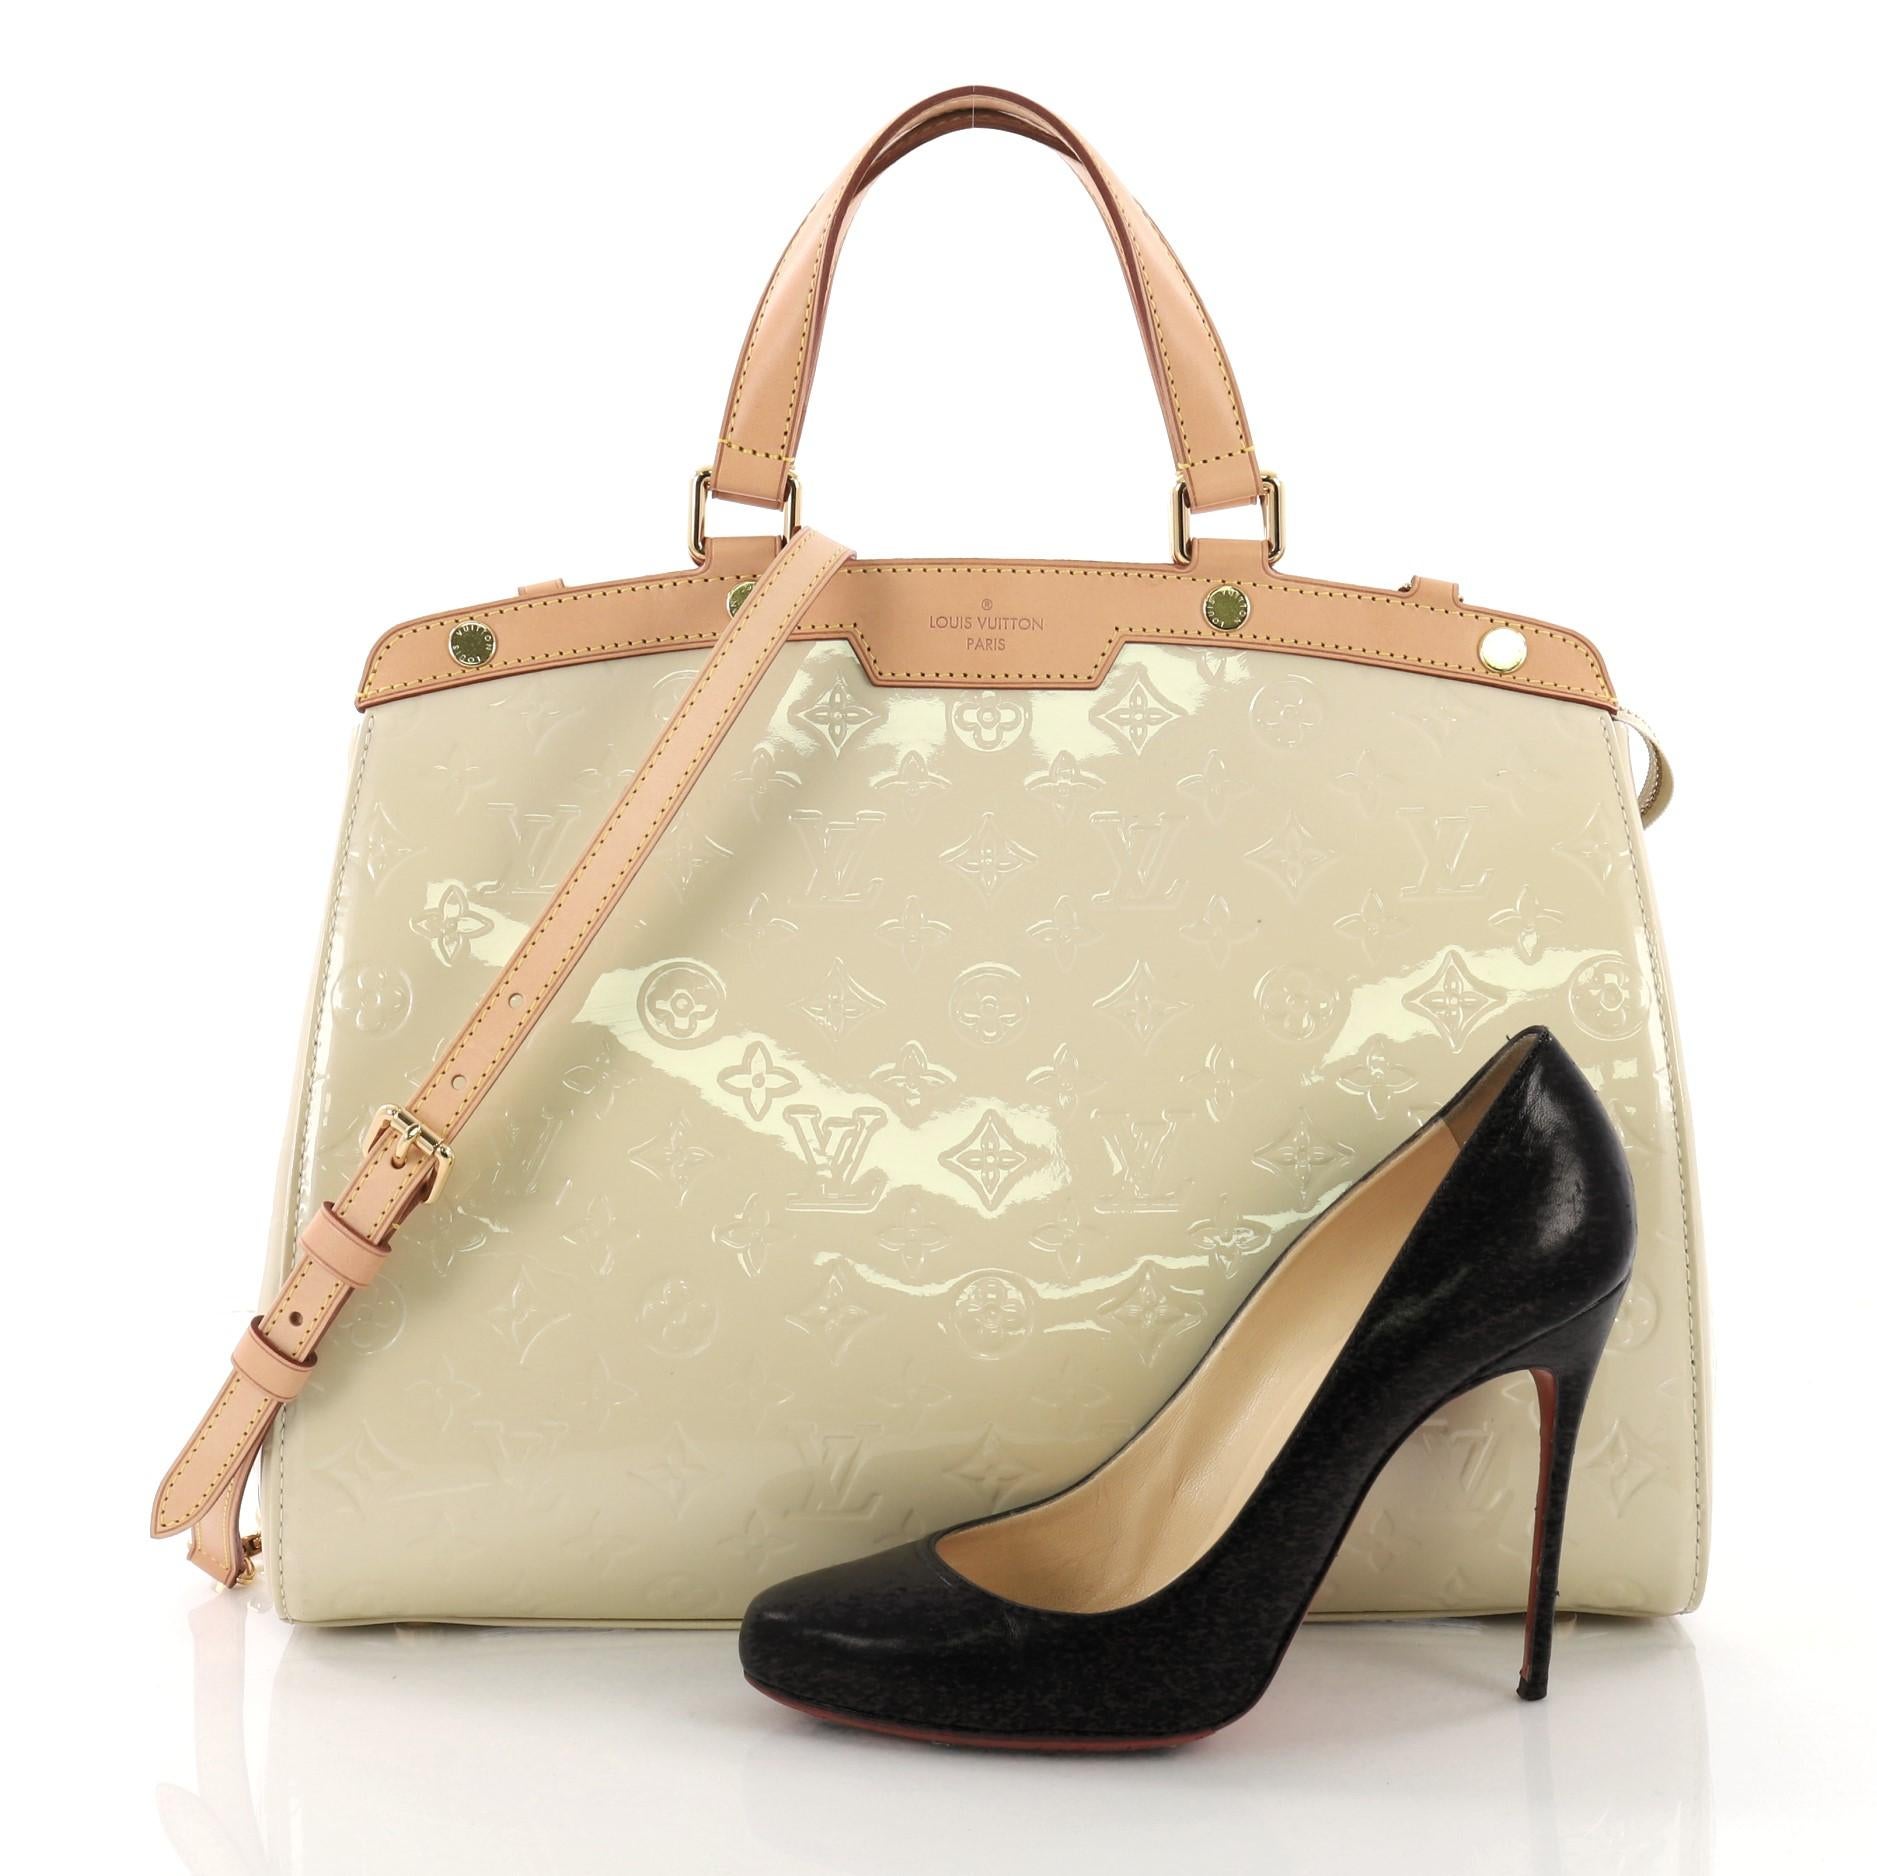 This Louis Vuitton Brea Handbag Monogram Vernis GM, crafted in beige monogram vernis leather with cowhide leather trims, features dual flat handles, protective base studs, and gold-tone hardware. Its top zip closure opens to a beige fabric interior